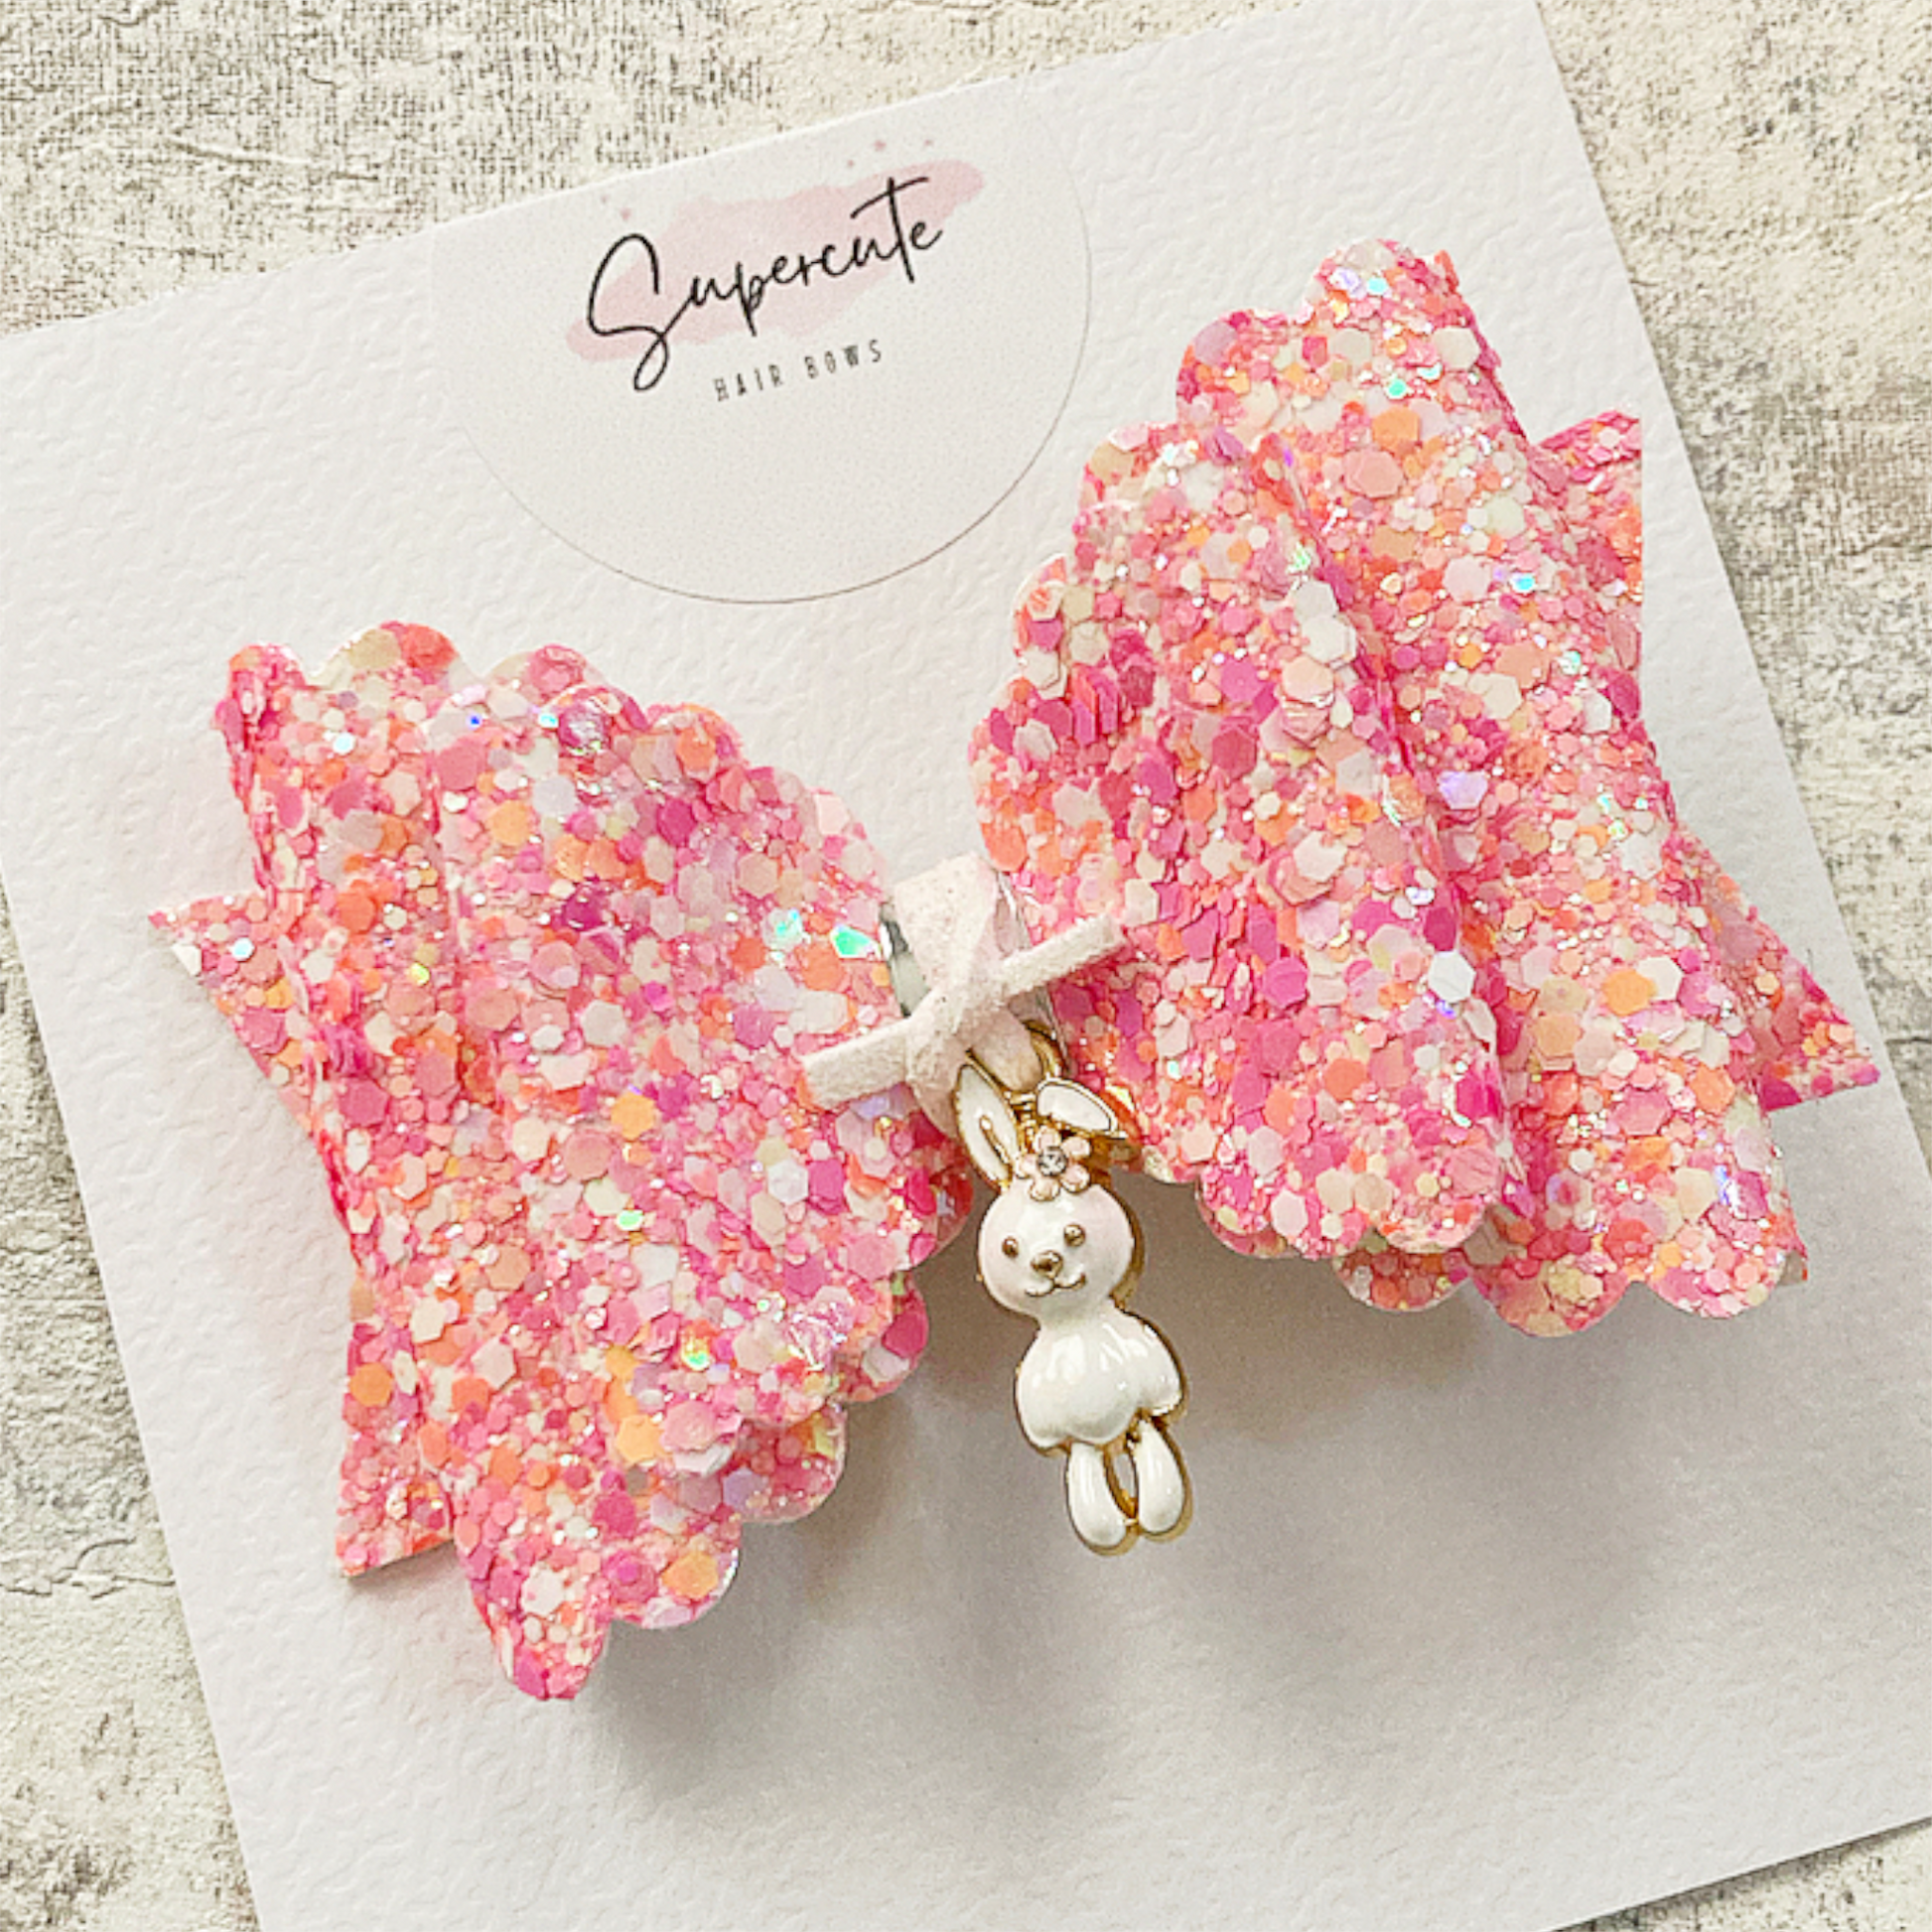 A pink mix chunky glitter hair bow with a little rabbit dangling charm 